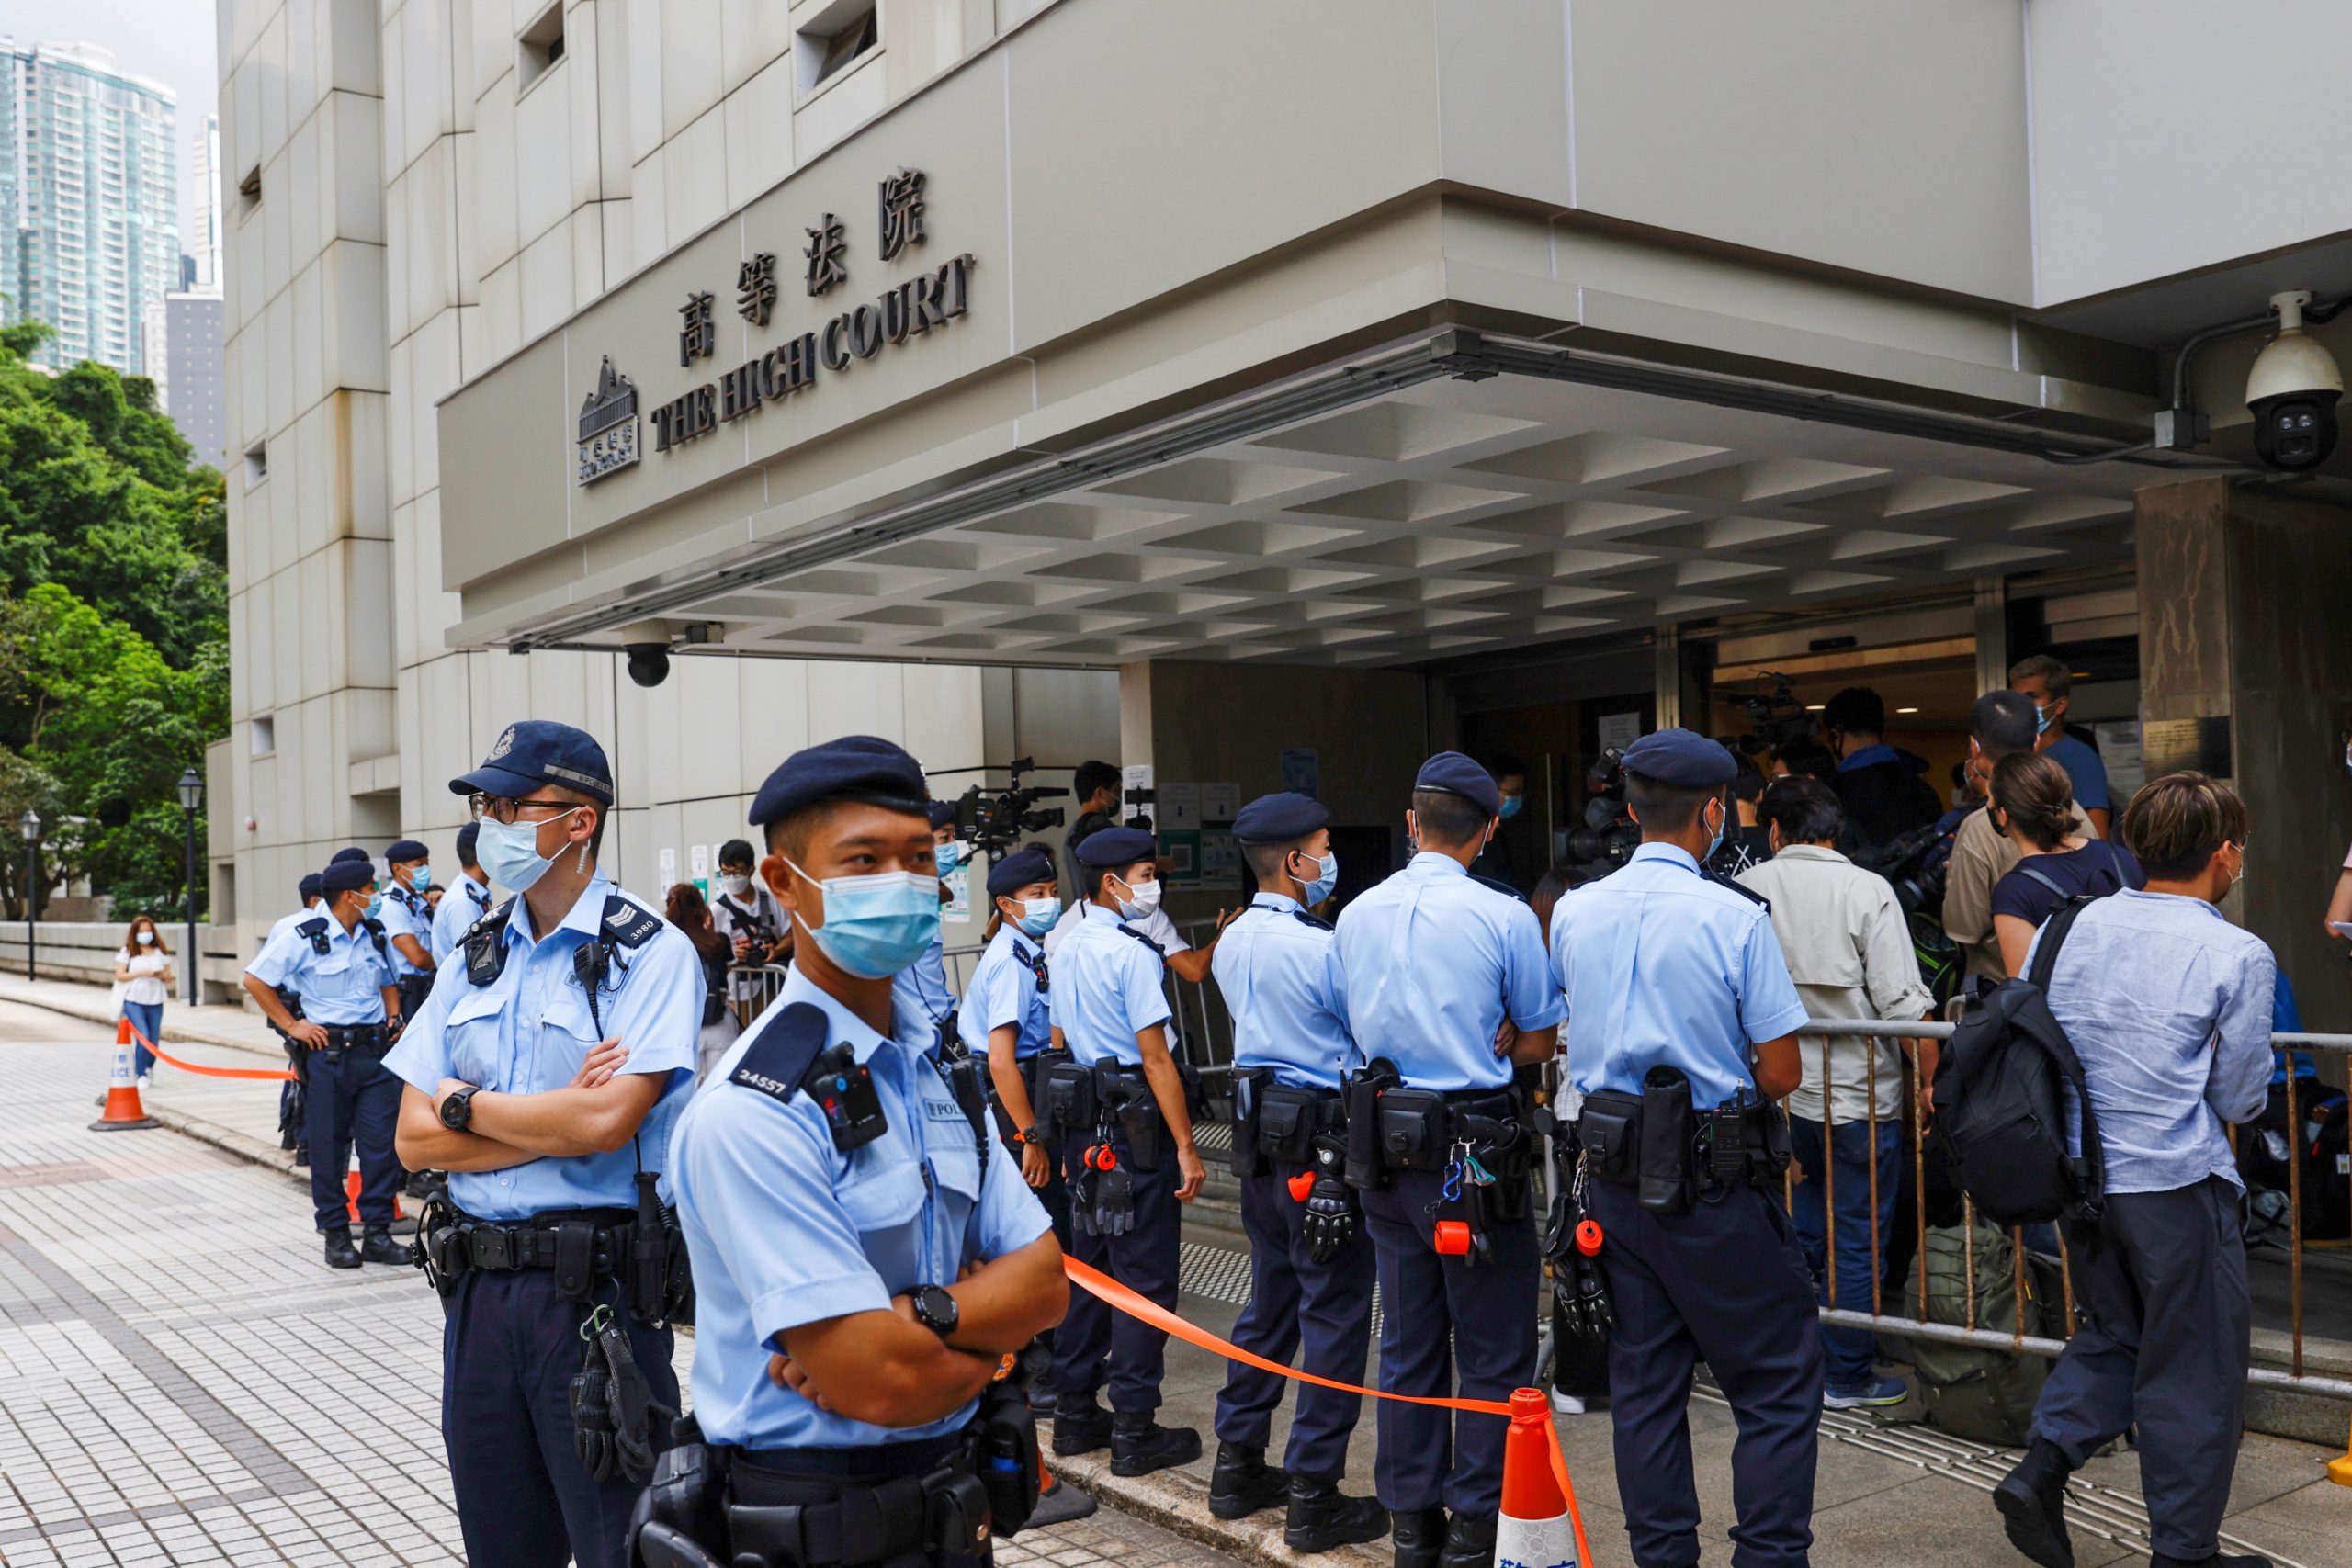 Security forces stand outside the High Court in Hong Kong